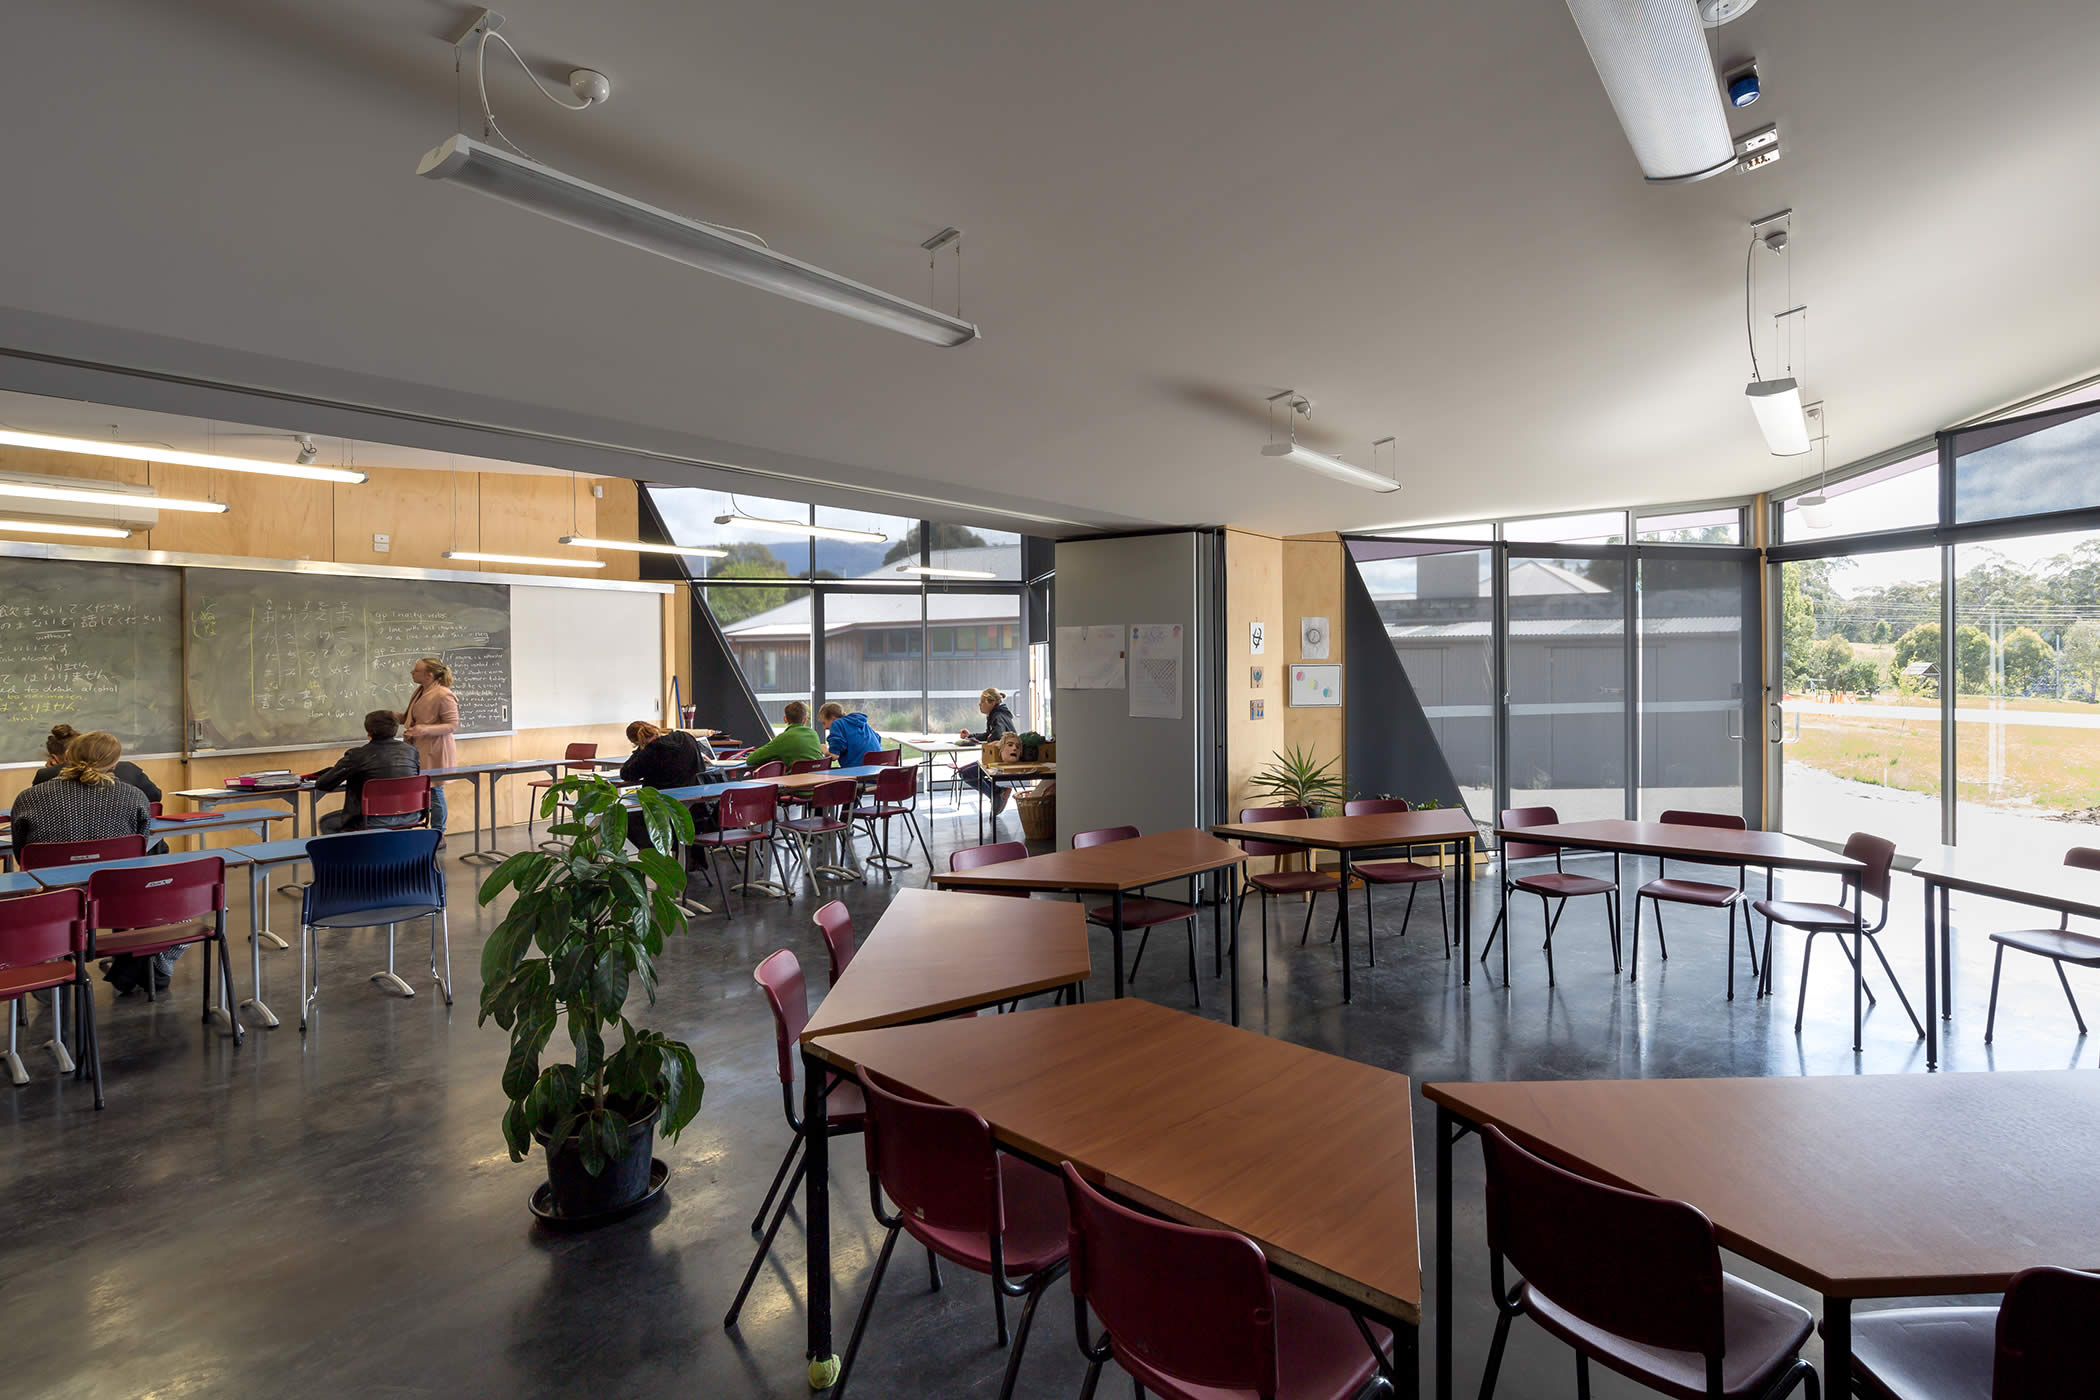 Tarremah Steiner High, Kingston, Tasmania: An internal acoustically rated operable wall links or separates adjacent learning spaces allowing flexible use and varied furniture layout supported by space efficient storage.   Photo by Thomas Ryan.